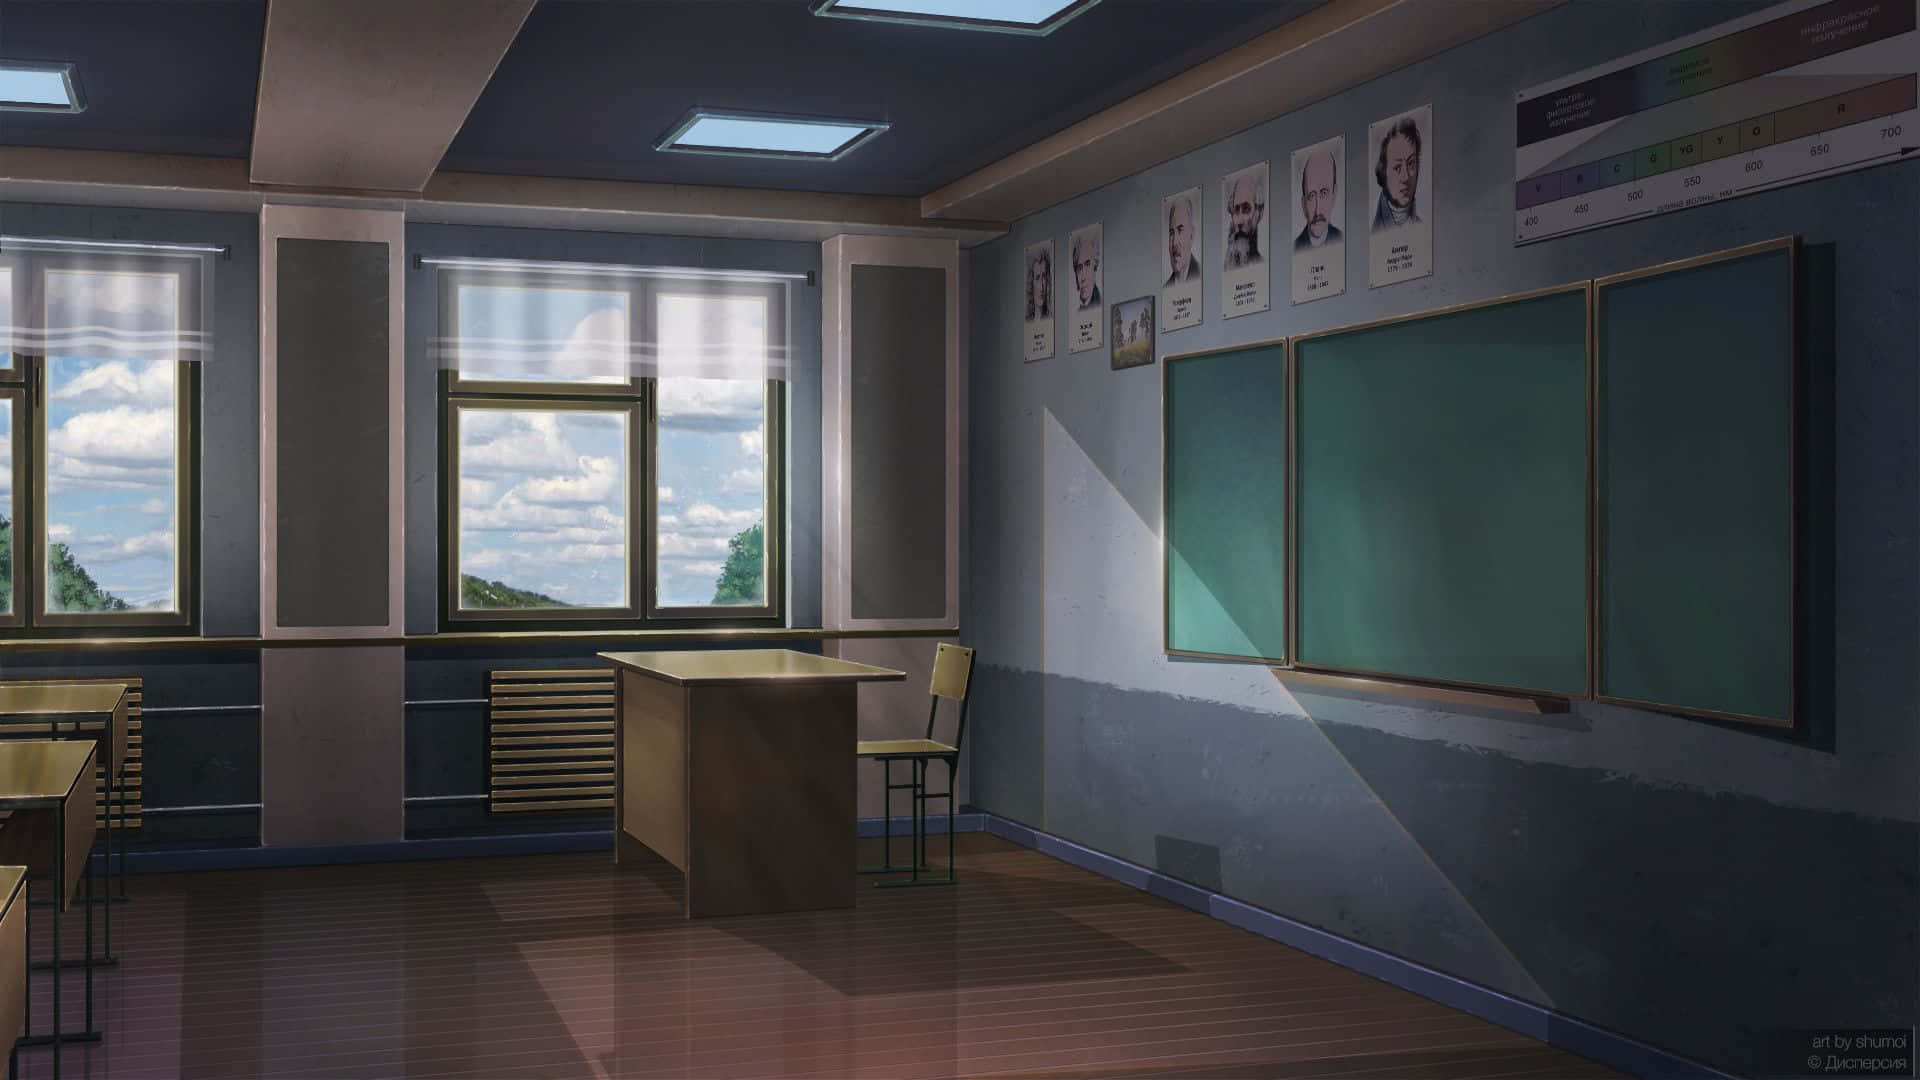 Studying at the Anime Classroom